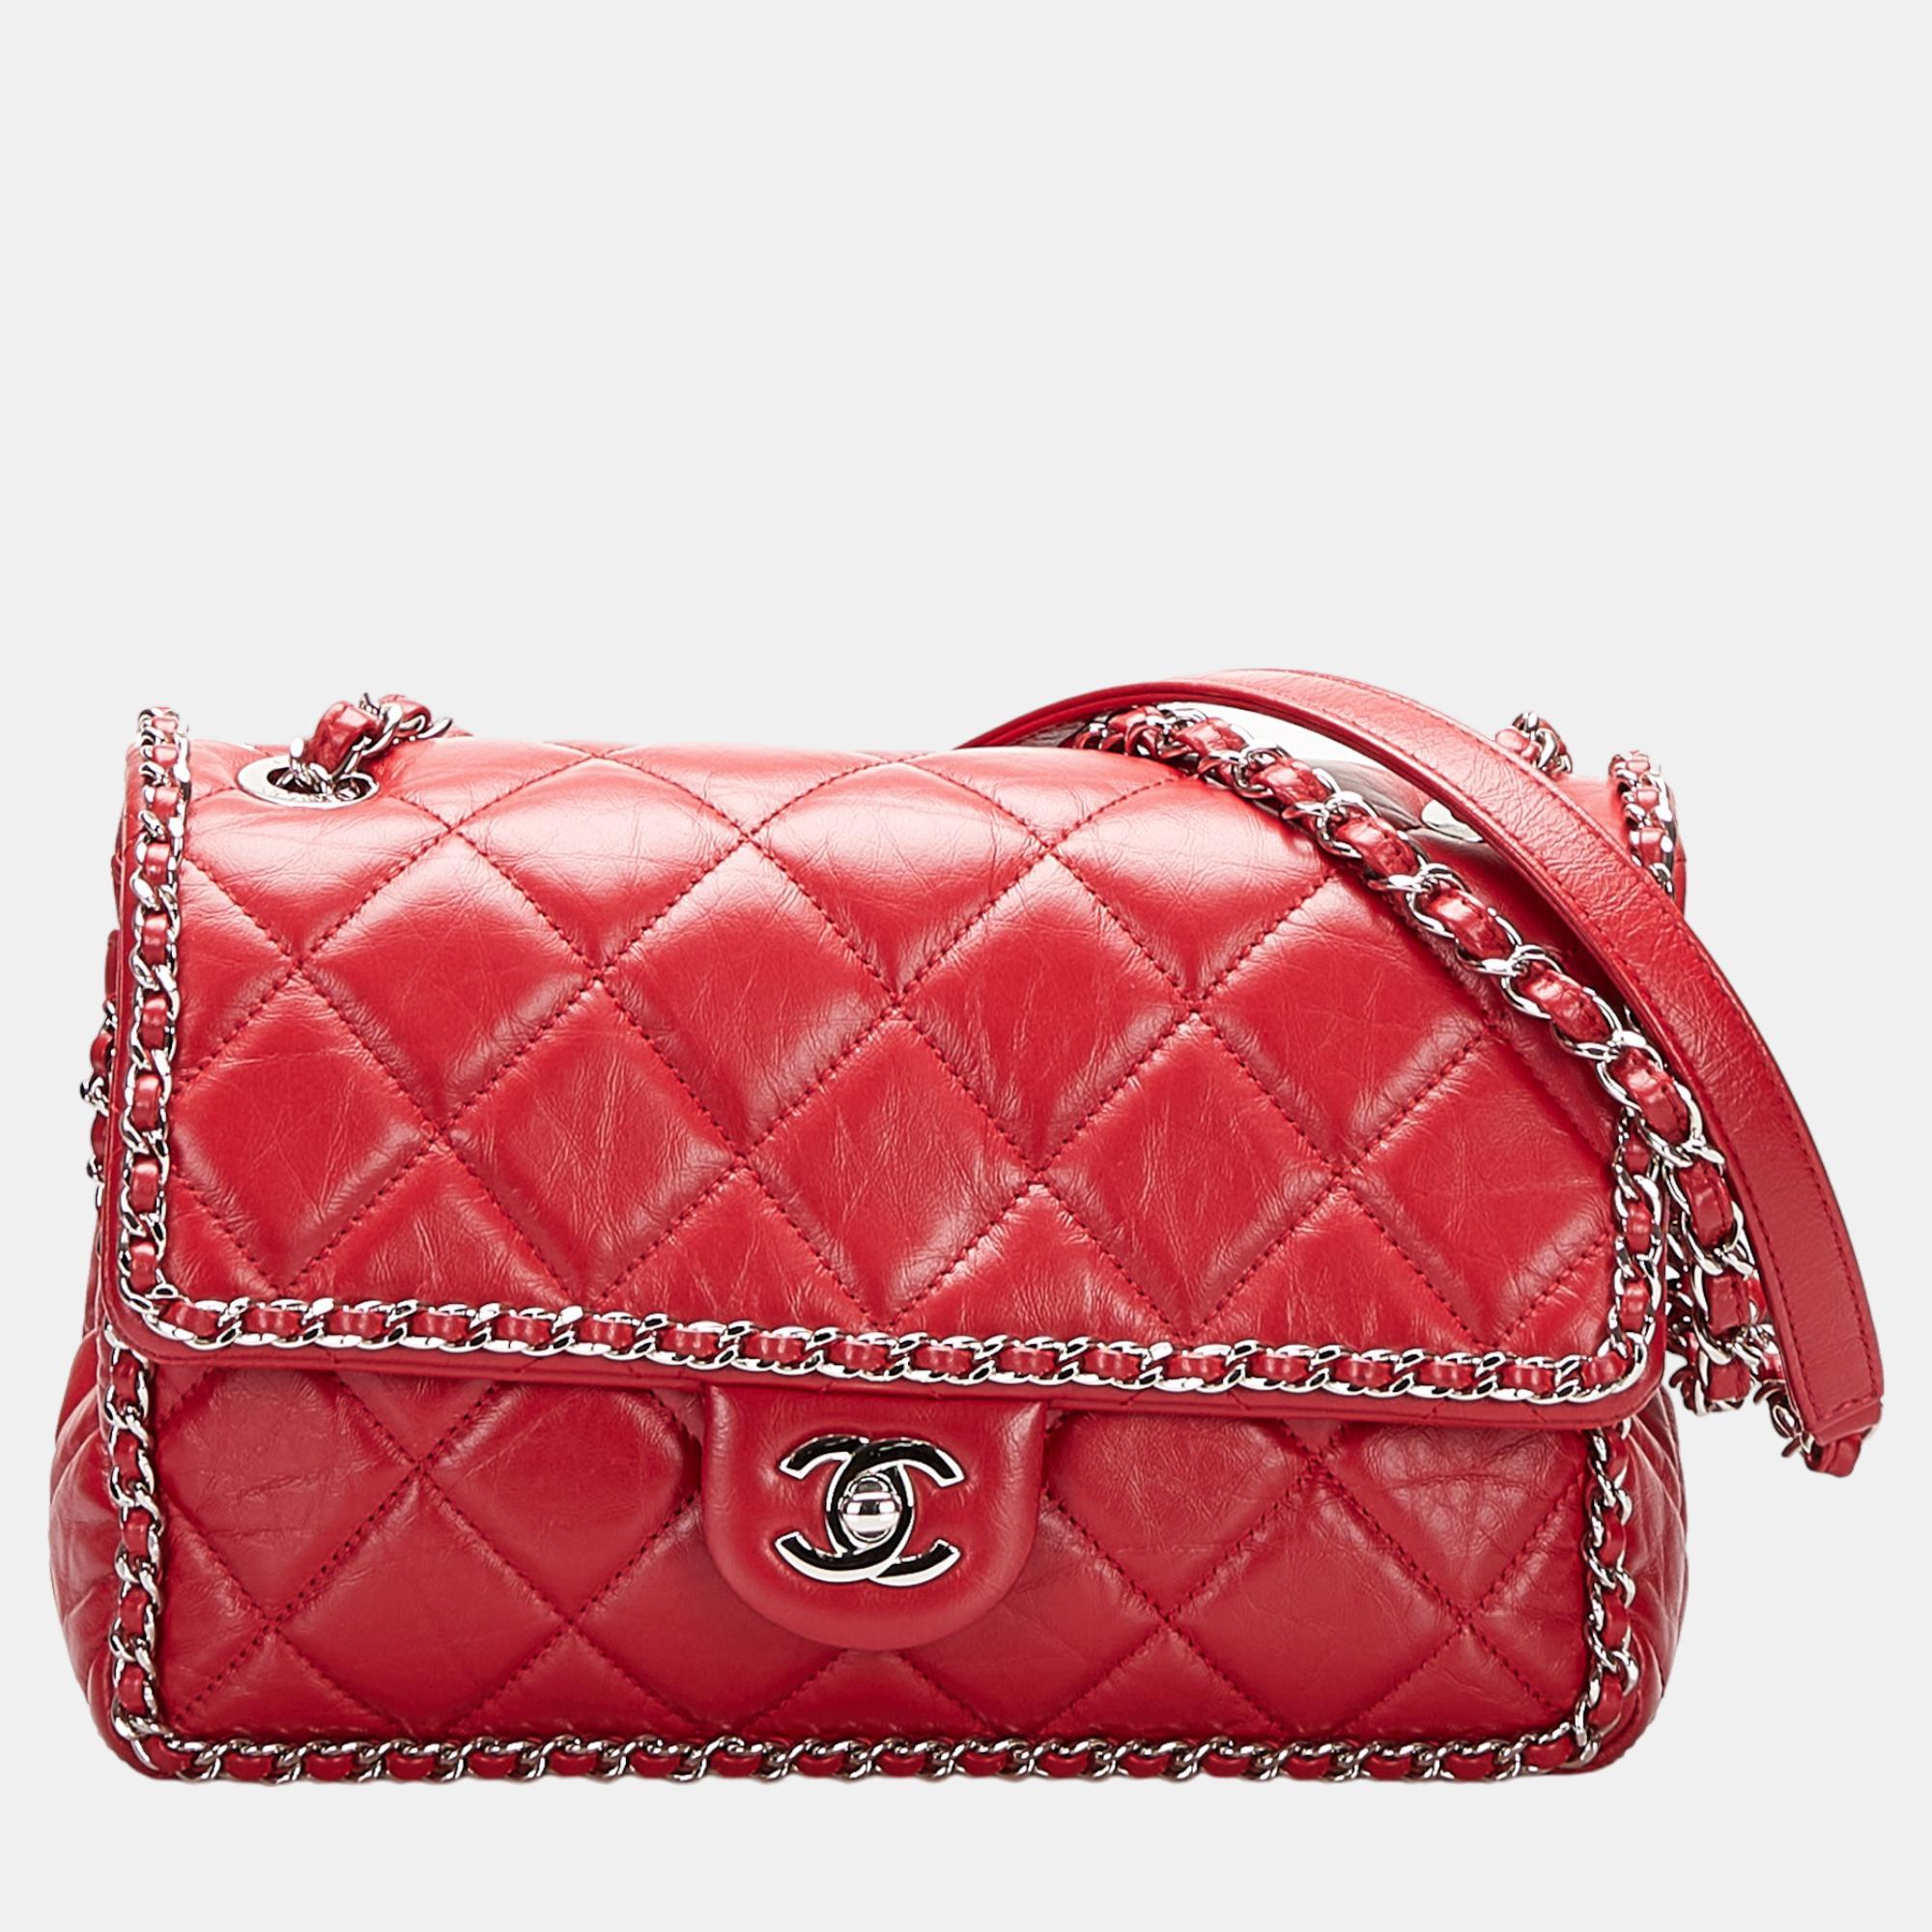 Chanel red crumpled chain all over flap